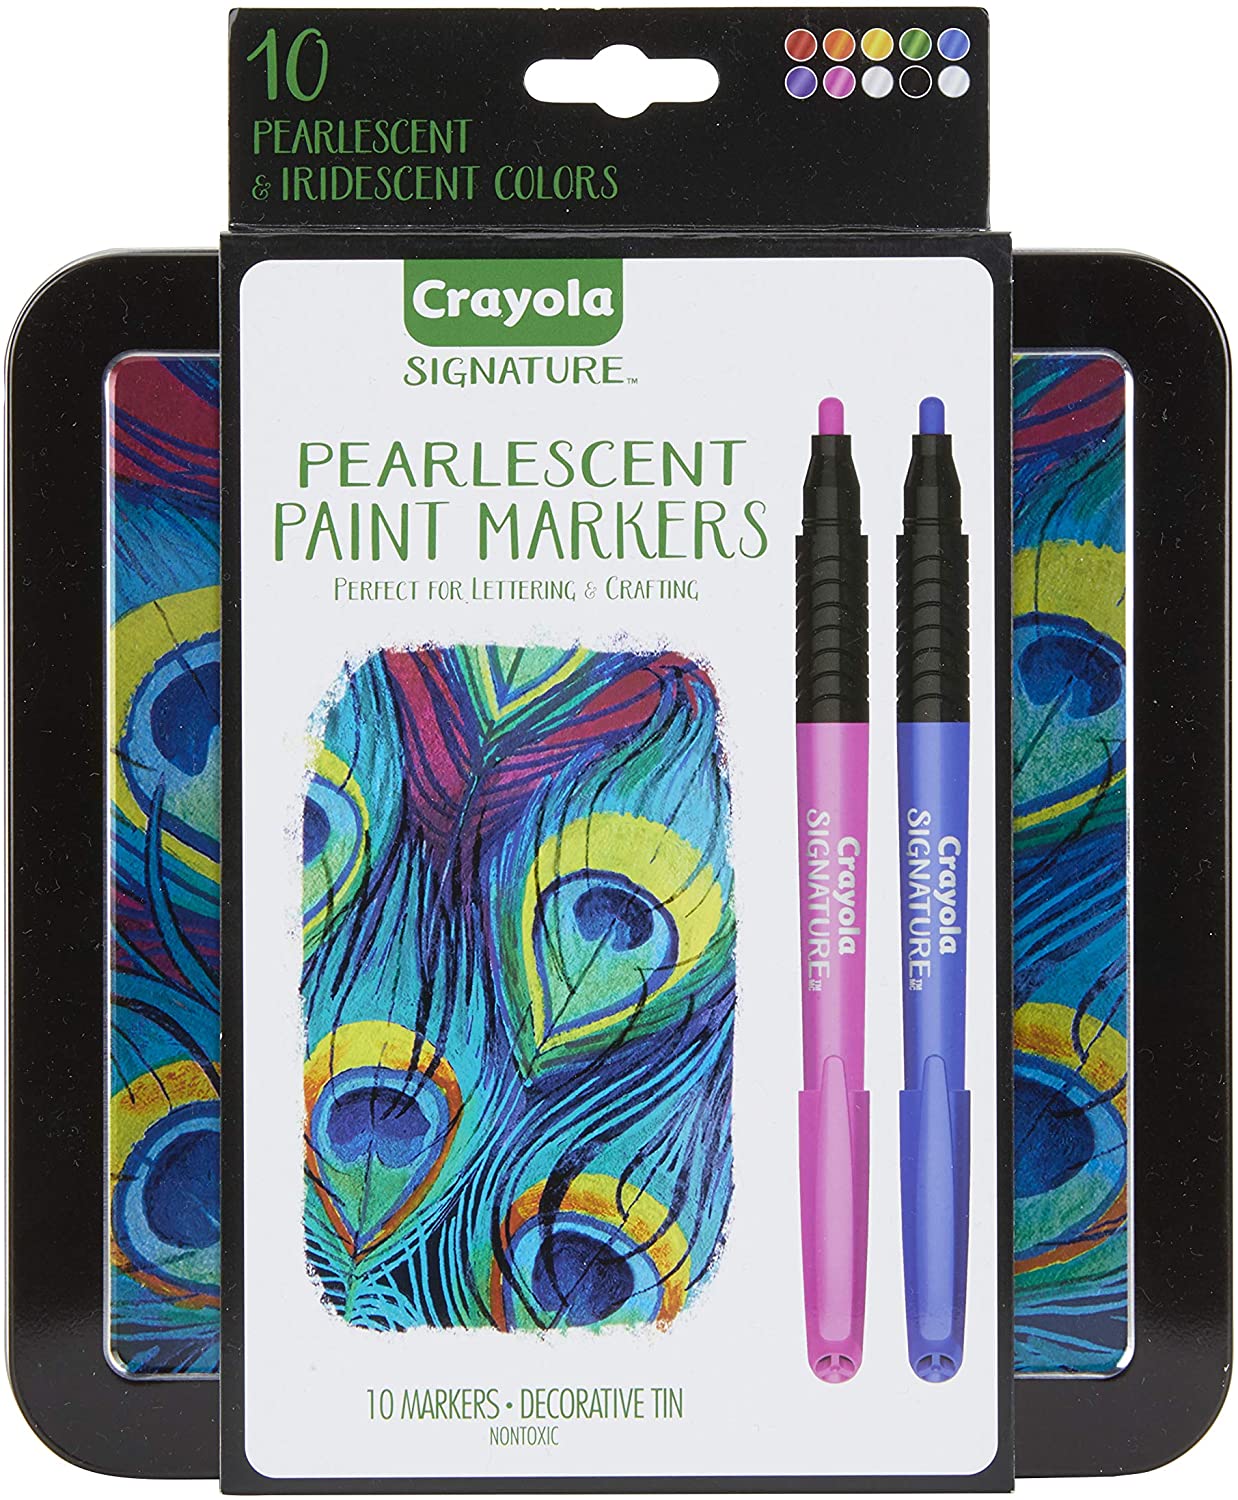 Crayola Age 14 Plus Signature 10 Count Pearlescent Paint Markers